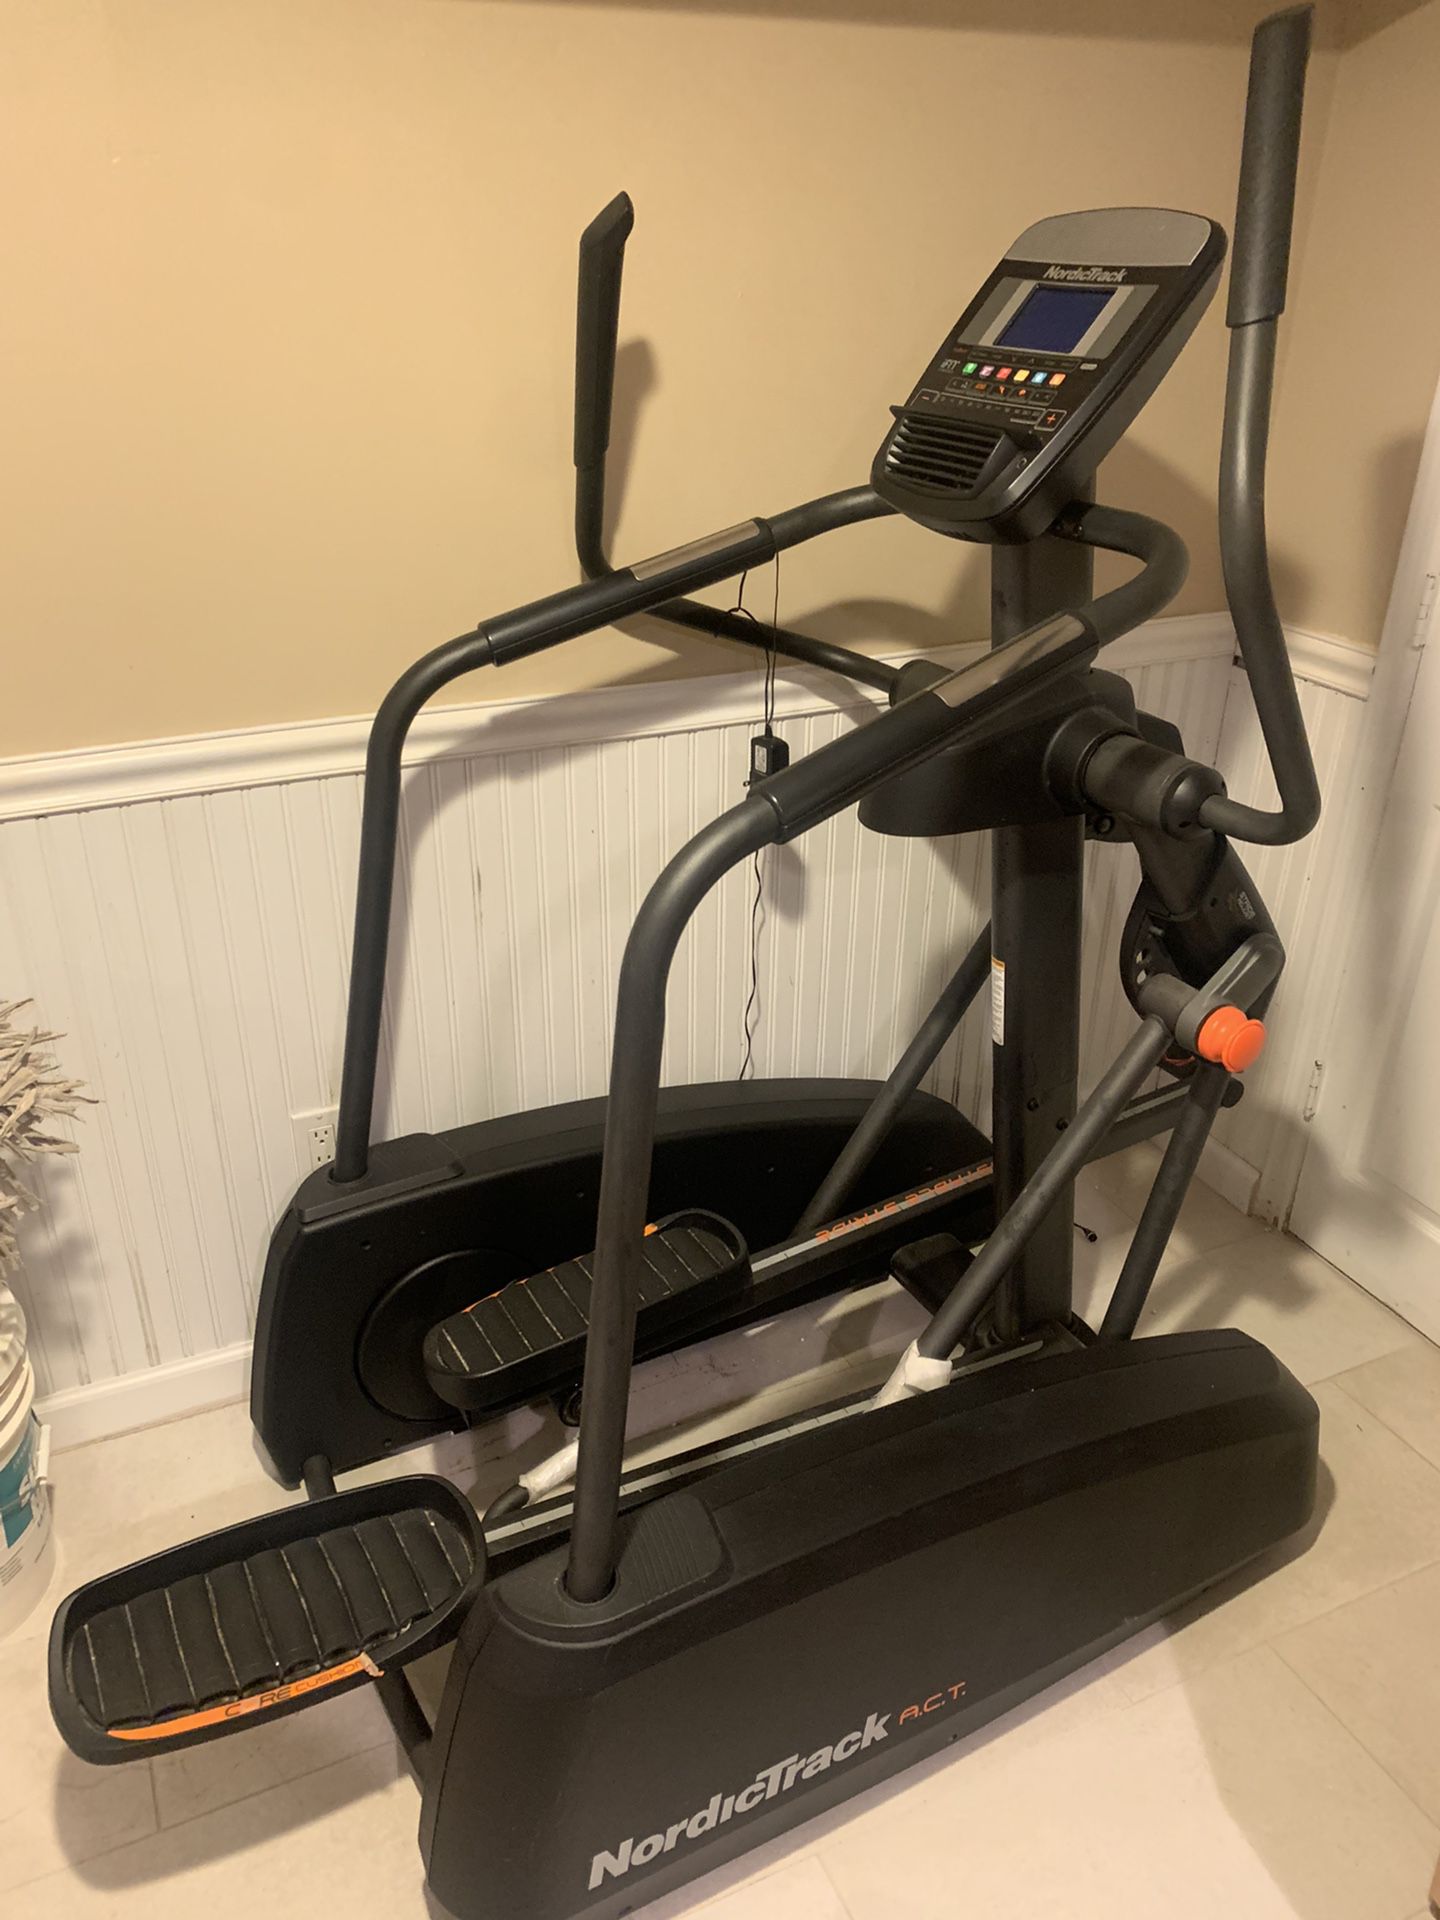 Nordictract ACT Elliptical